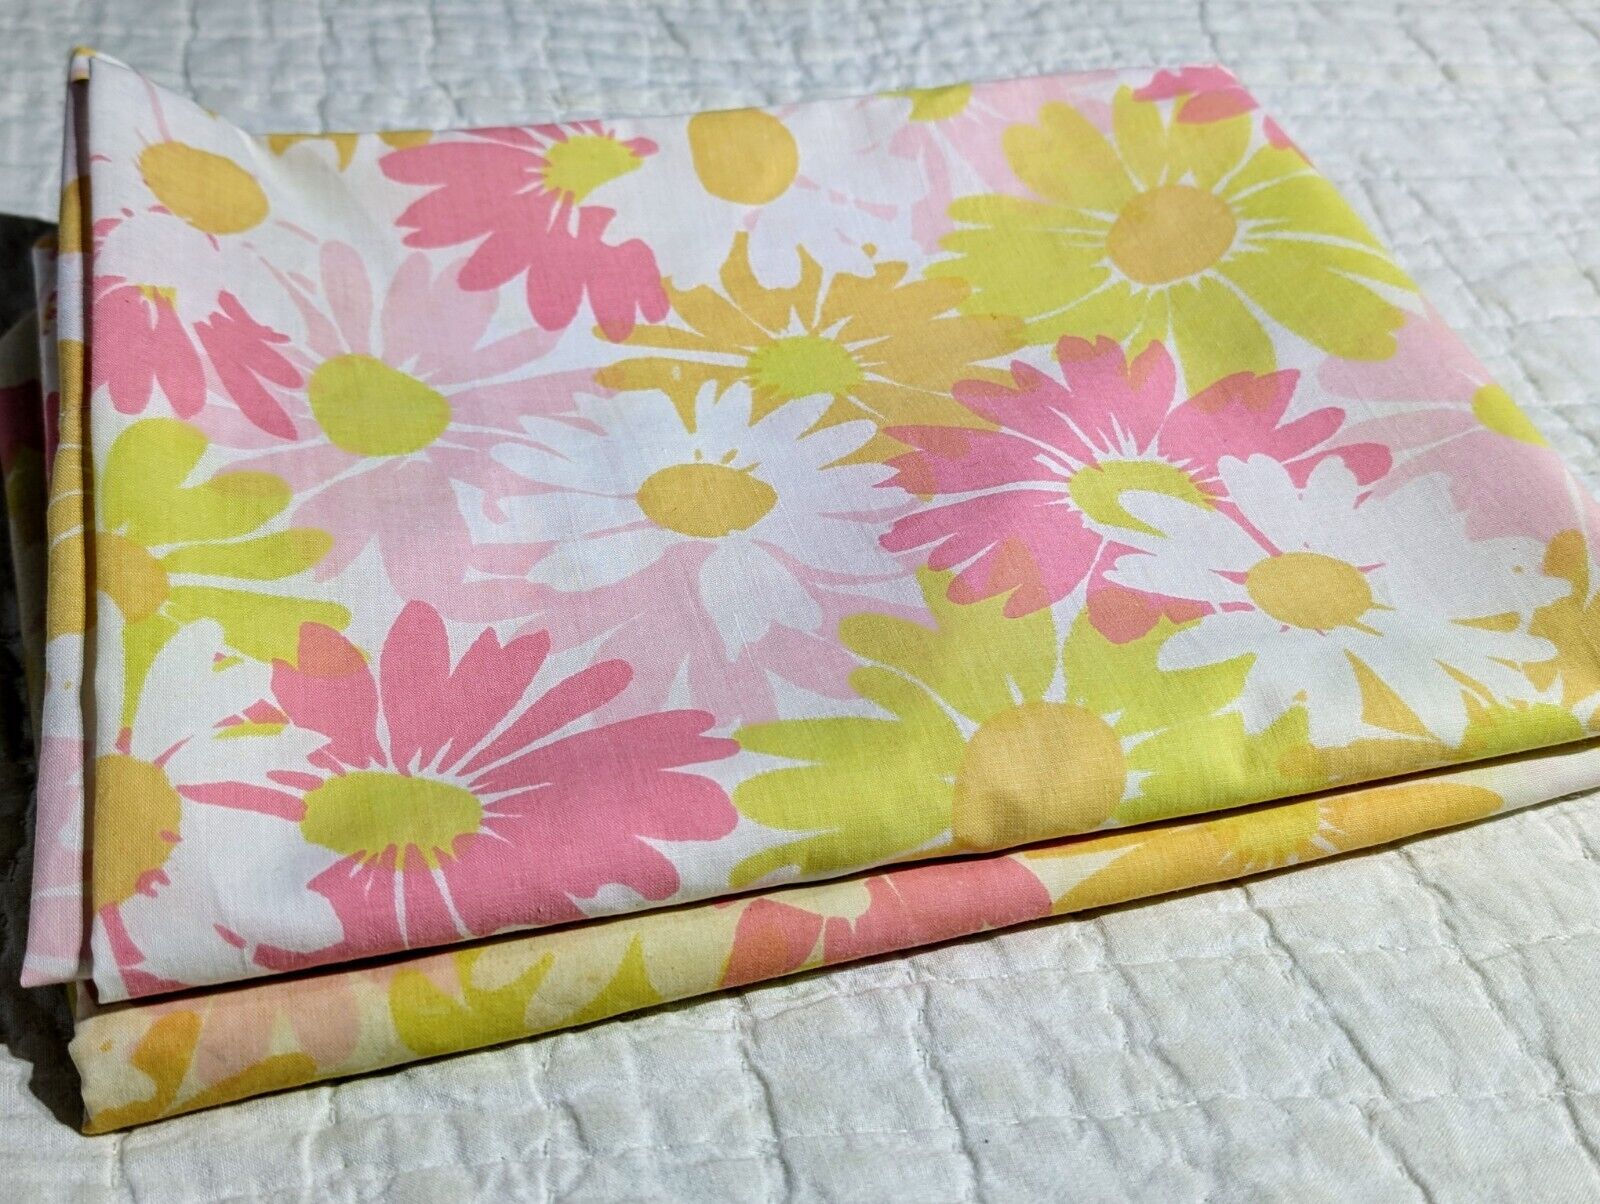 Vintage Daisy Pillowcase Pequot Set Groovy Hippie Pink Yellow Standard Flawed